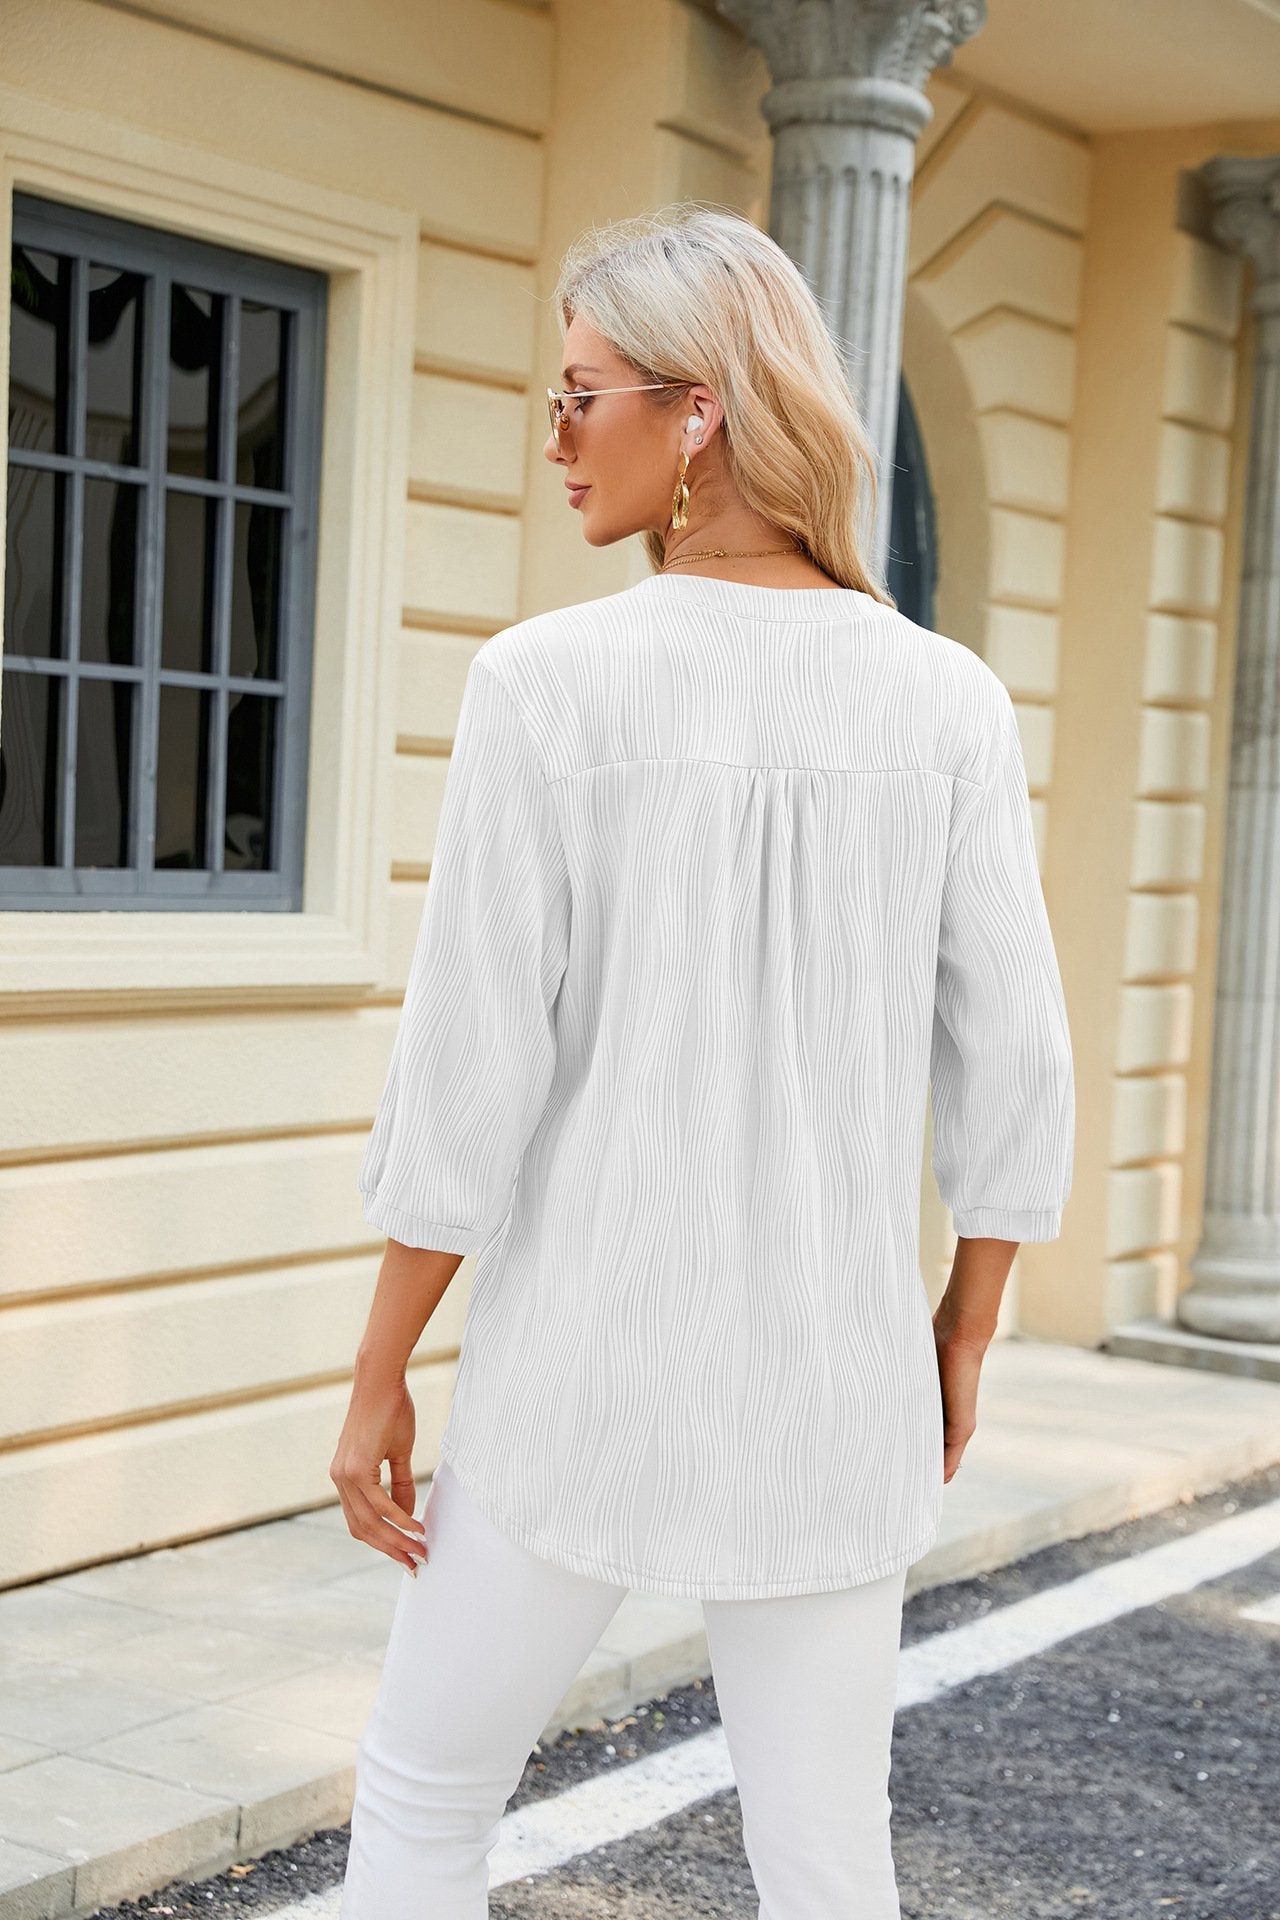 Women's Solid Color V-neck Button Casual Chiffon Top